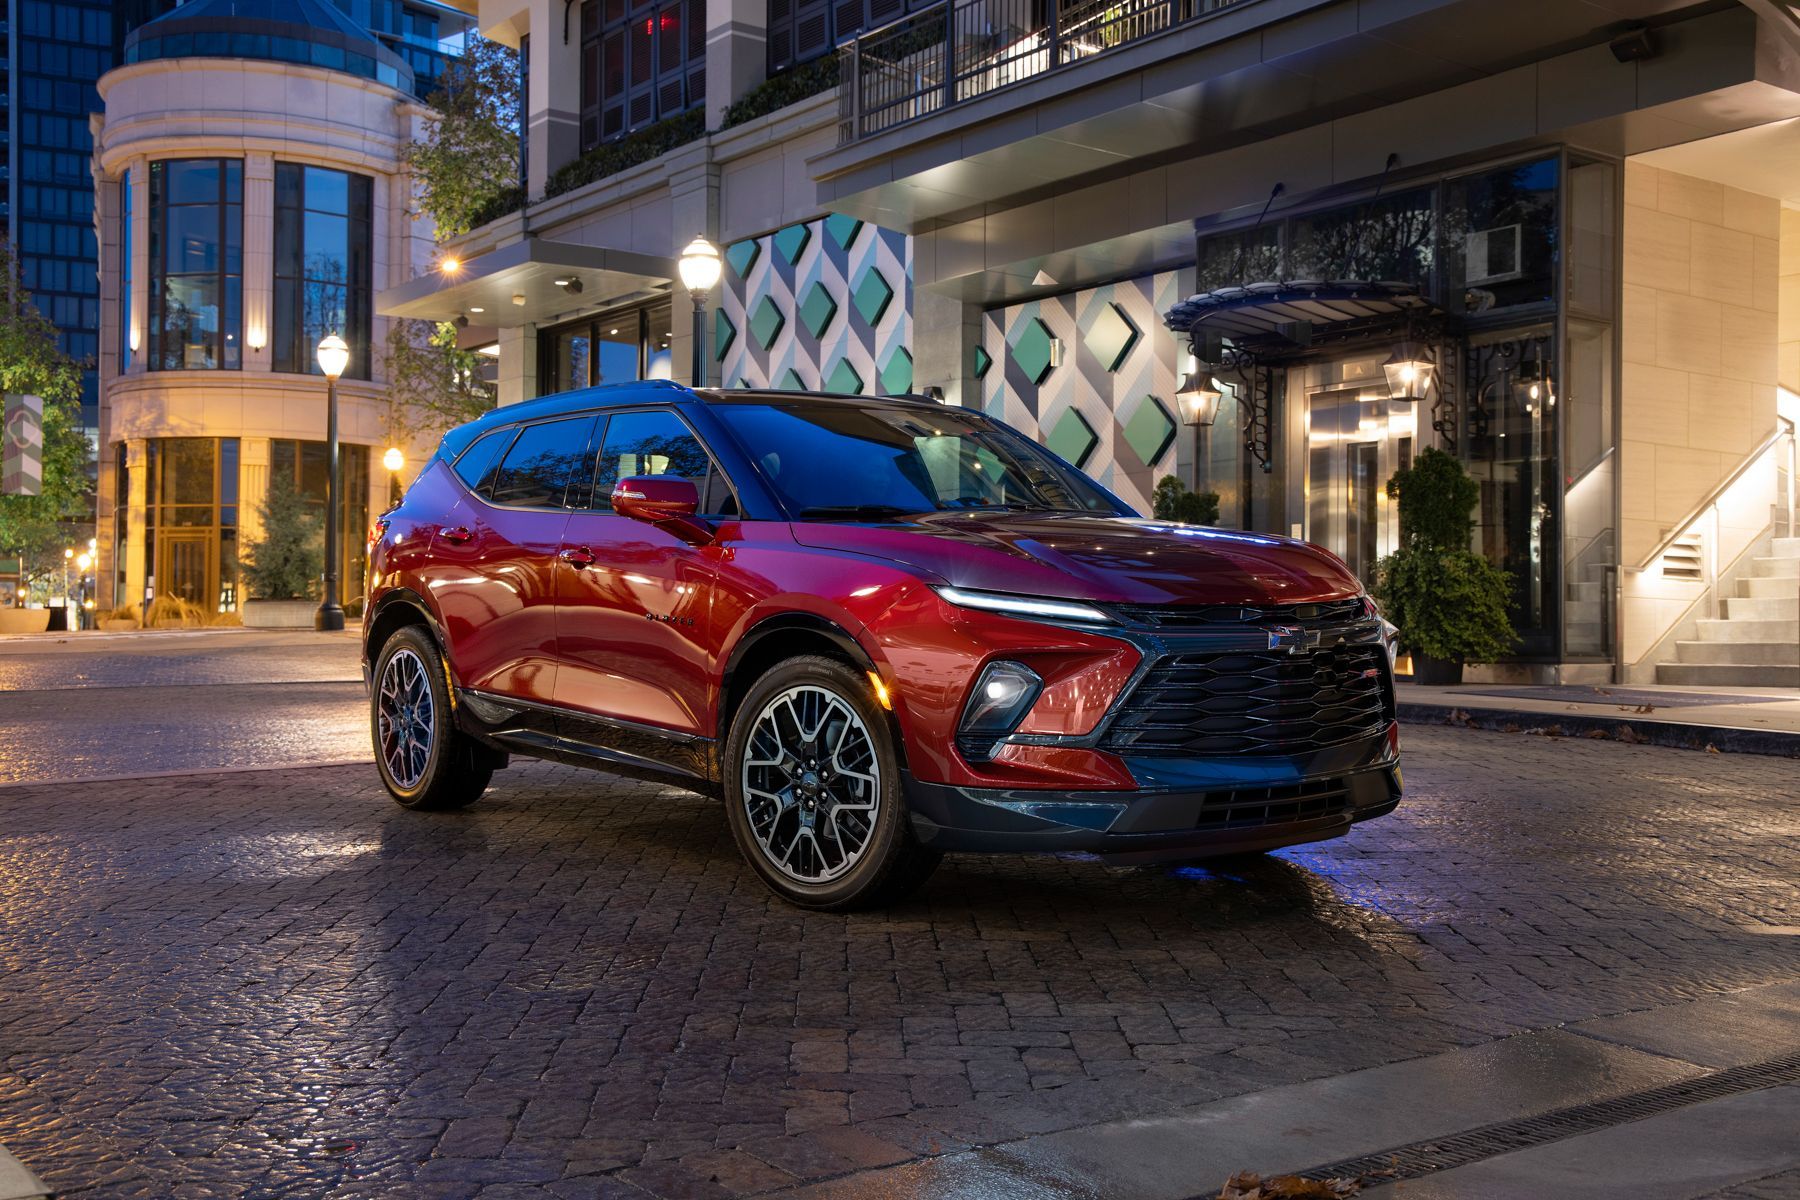 2023 Chevrolet Blazer parked in town square